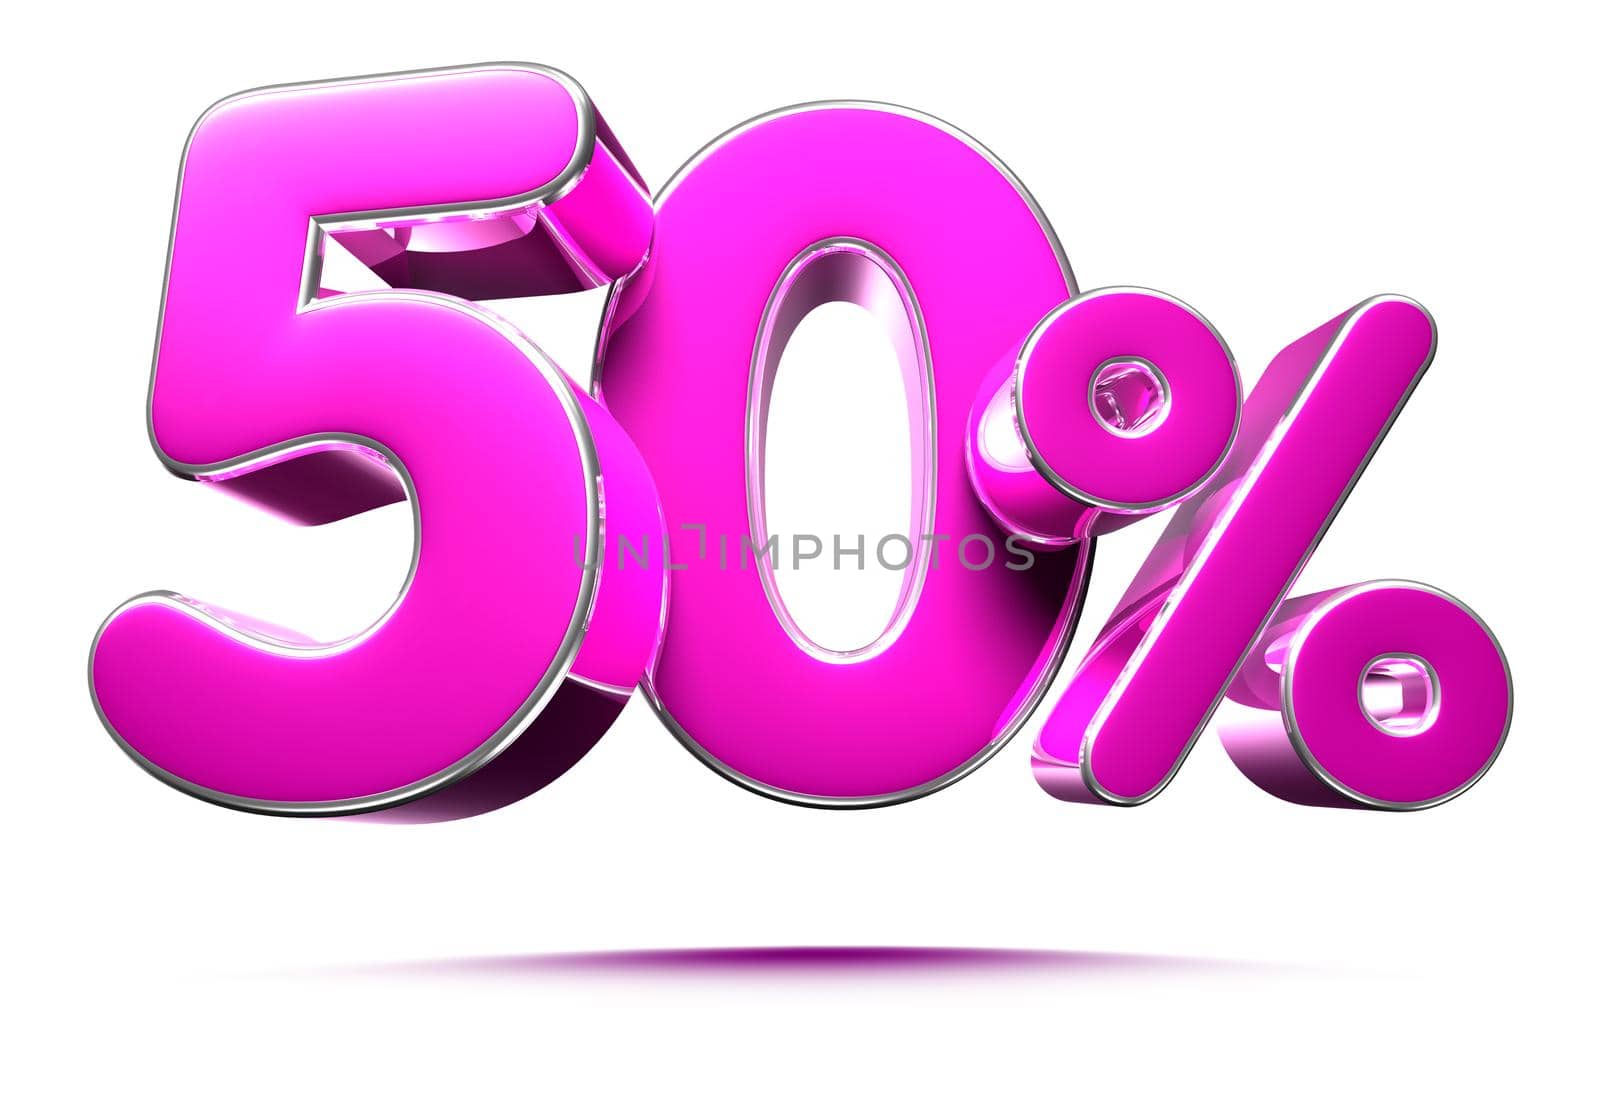 Pink 50 Percent 3d illustration Sign on White Background, Special Offer 50% Discount Tag, Sale Up to 50 Percent Off,share 50 percent,50% off storewide.With clipping path.